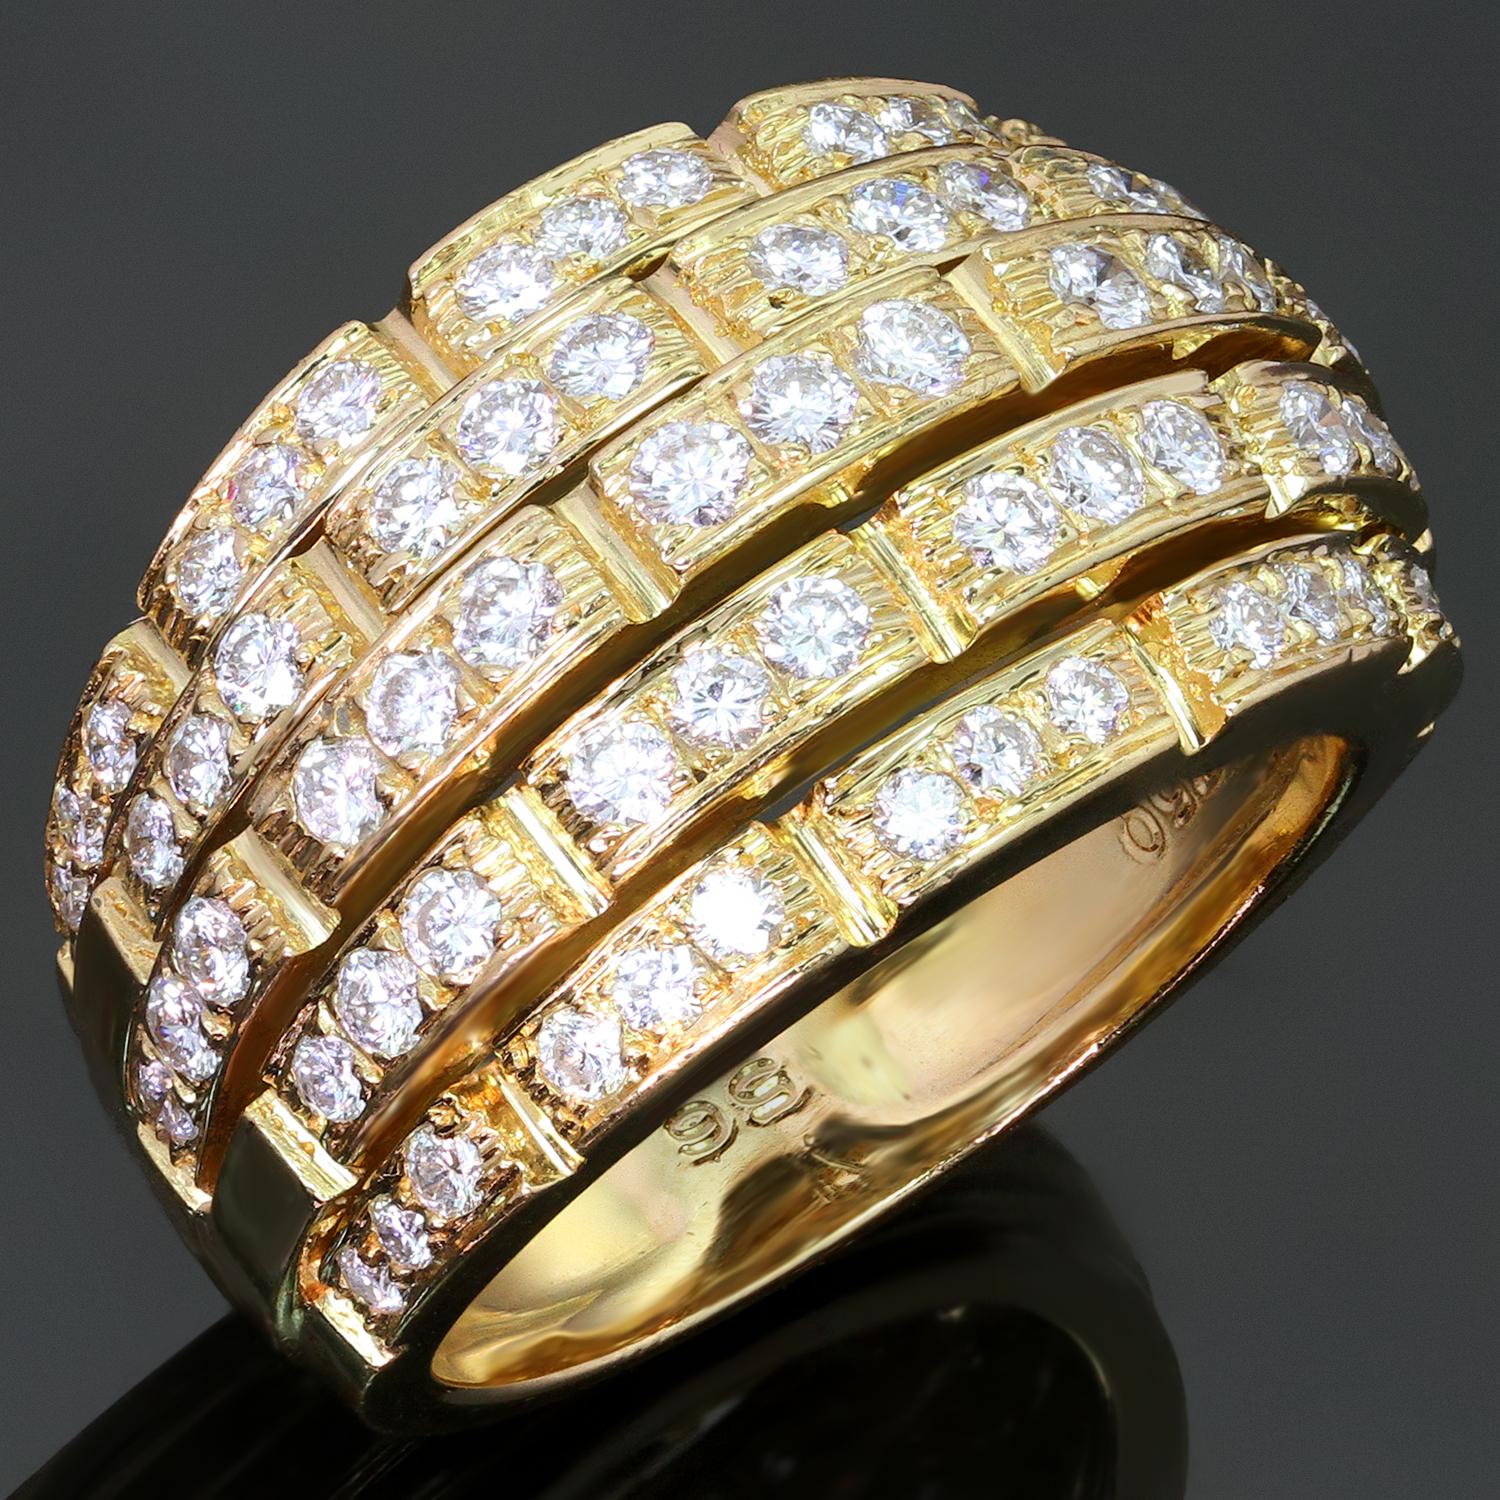 This stunning band from Cartier's Maillon Panthère collection features a 5-row bombe design crafted in 18k yellow gold and set with brilliant-cut round F-G VVS1-VVS2 diamonds of an estimated 2.27 carats. Made in France circa 1980s. Measurements: